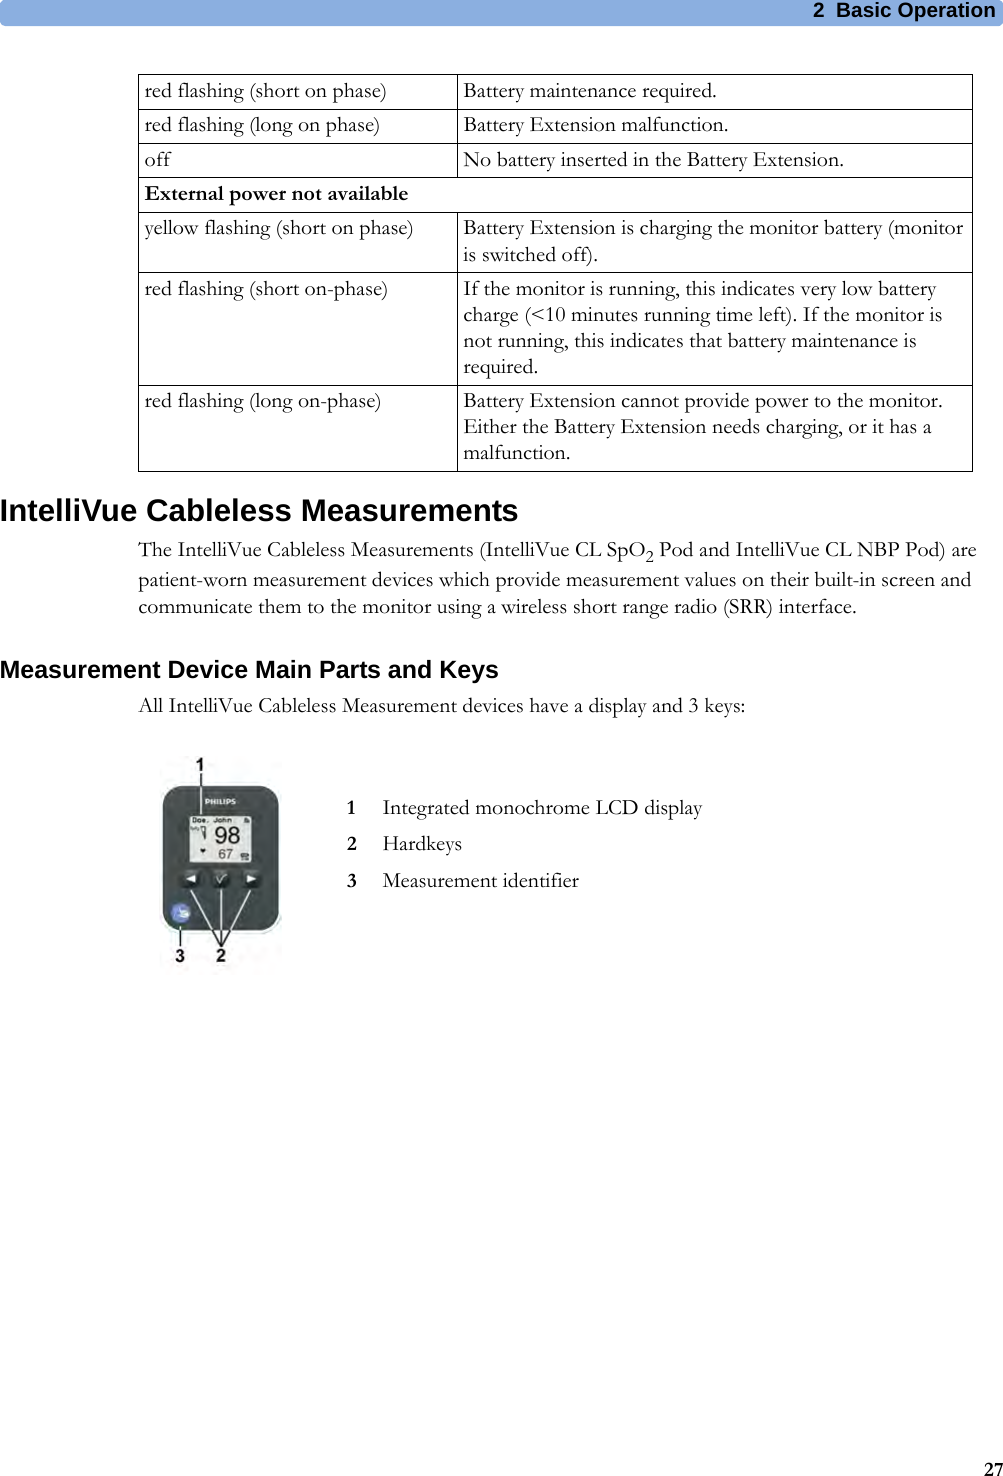 2 Basic Operation27IntelliVue Cableless MeasurementsThe IntelliVue Cableless Measurements (IntelliVue CL SpO2 Pod and IntelliVue CL NBP Pod) are patient-worn measurement devices which provide measurement values on their built-in screen and communicate them to the monitor using a wireless short range radio (SRR) interface.Measurement Device Main Parts and KeysAll IntelliVue Cableless Measurement devices have a display and 3 keys:red flashing (short on phase) Battery maintenance required.red flashing (long on phase) Battery Extension malfunction.off No battery inserted in the Battery Extension.External power not availableyellow flashing (short on phase) Battery Extension is charging the monitor battery (monitor is switched off).red flashing (short on-phase) If the monitor is running, this indicates very low battery charge (&lt;10 minutes running time left). If the monitor is not running, this indicates that battery maintenance is required.red flashing (long on-phase) Battery Extension cannot provide power to the monitor. Either the Battery Extension needs charging, or it has a malfunction.1Integrated monochrome LCD display2Hardkeys3Measurement identifier